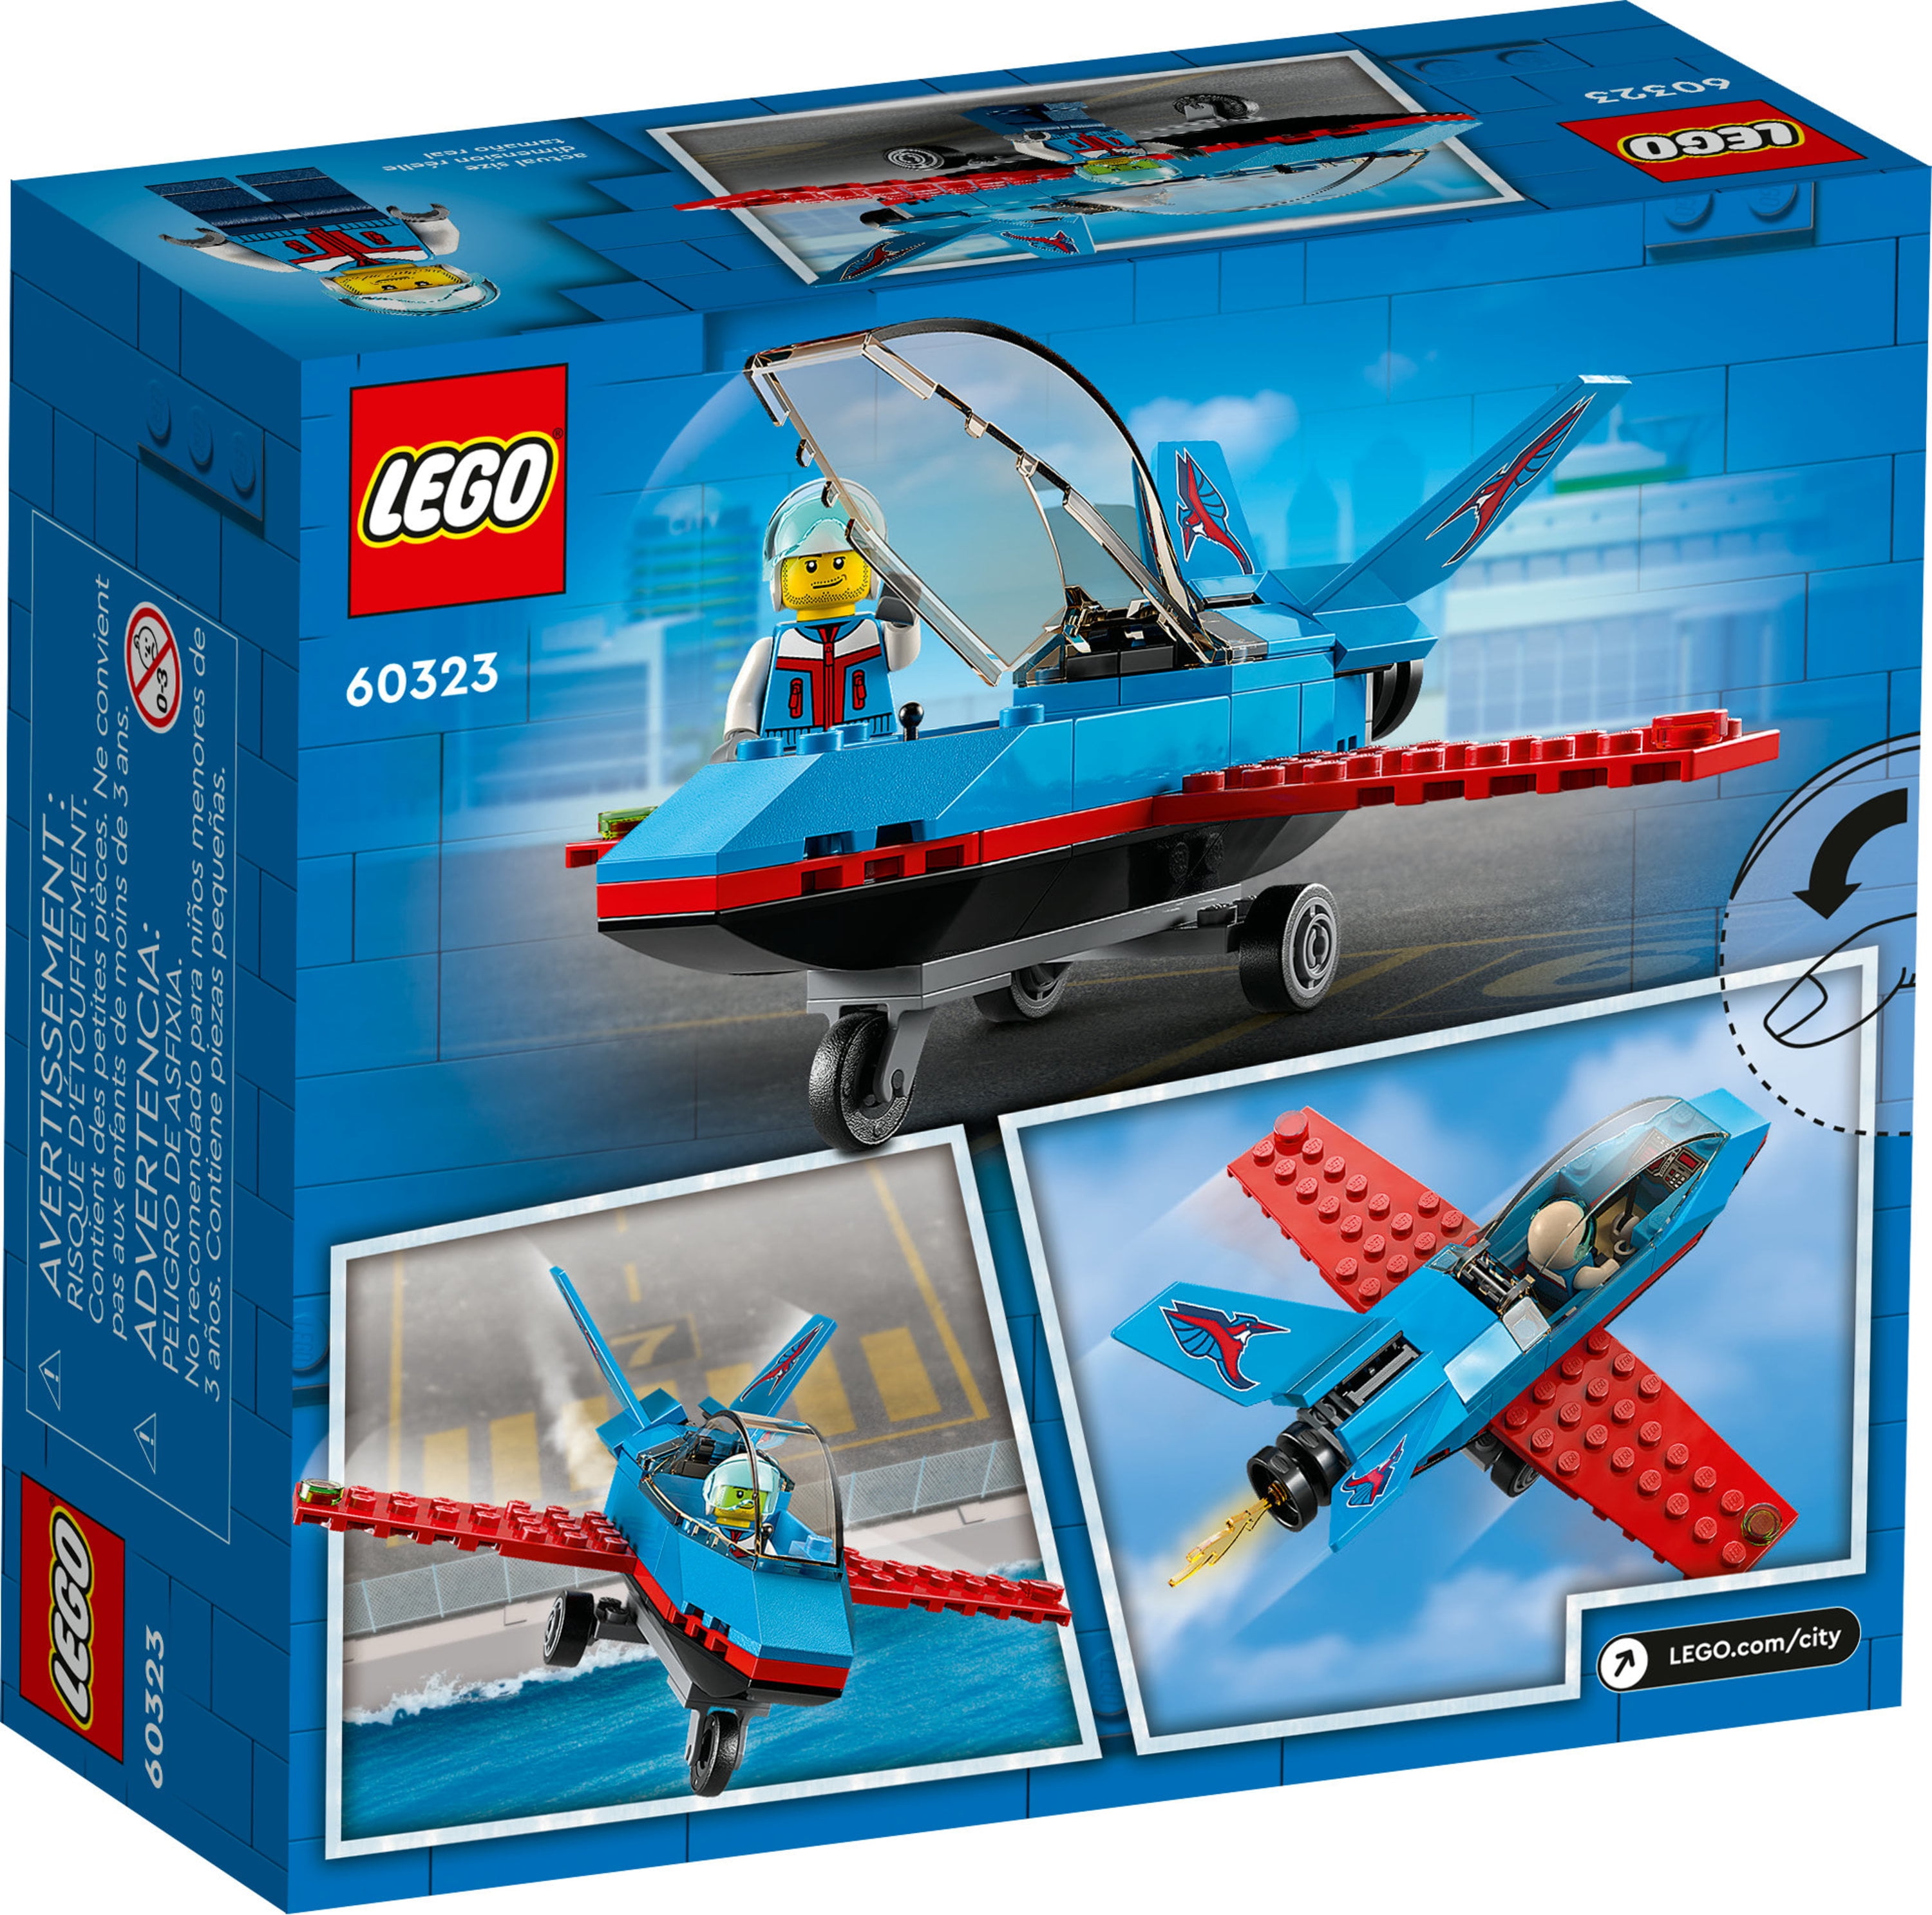 LEGO City Great Vehicles Toy, Old Pilot and Jet 5 Stunt Gifts Boys Girls Minifigure 2022 Kids, with 60323 Plane Building plus Years Set, for Airplane